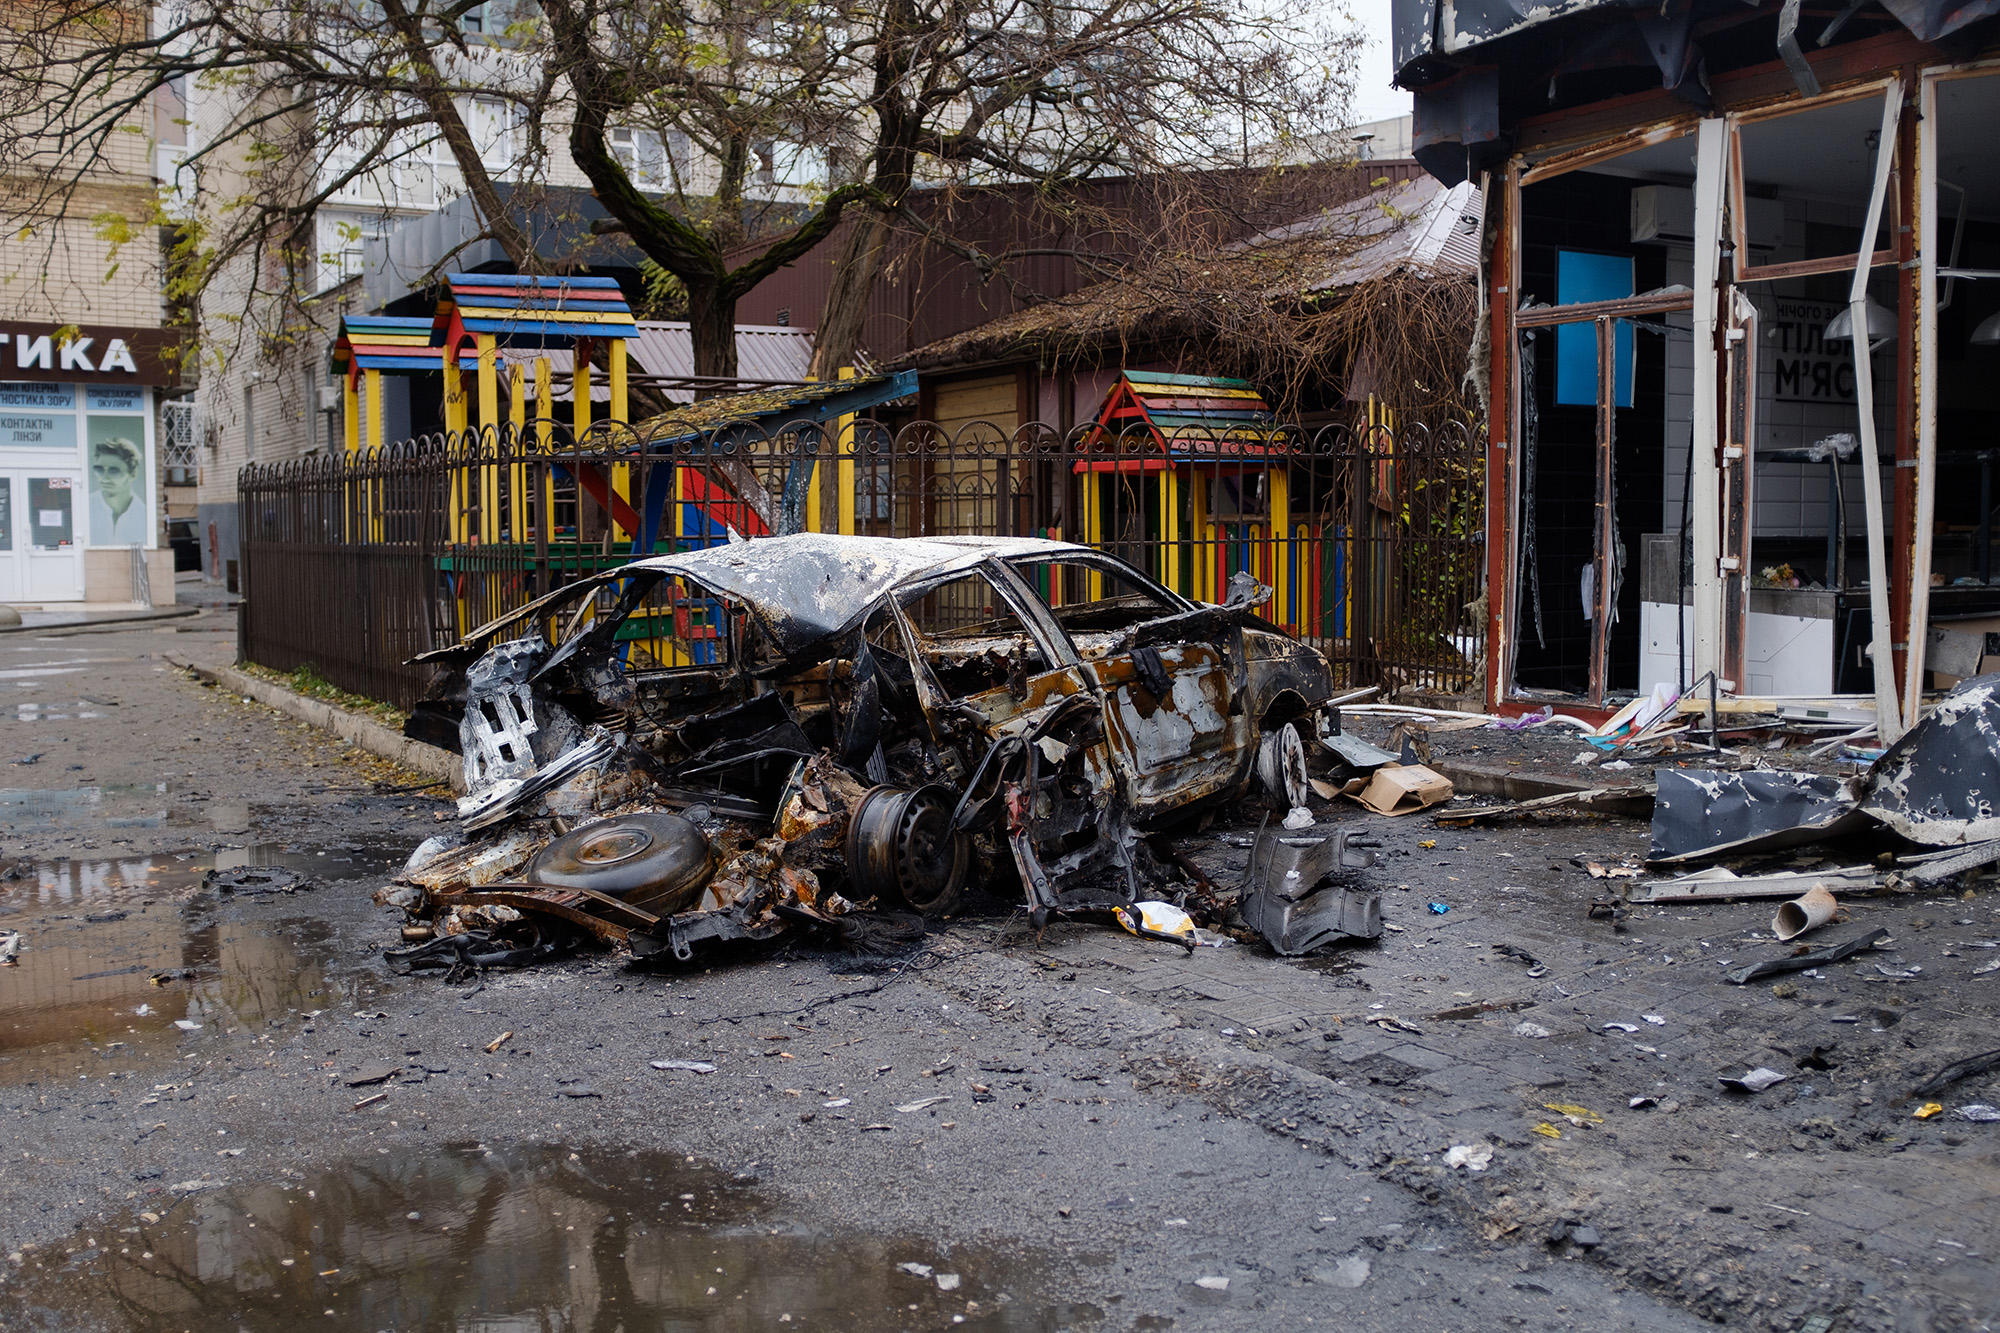 The site of a Russian shelling in Kherson where four were killed, according to the local administration.